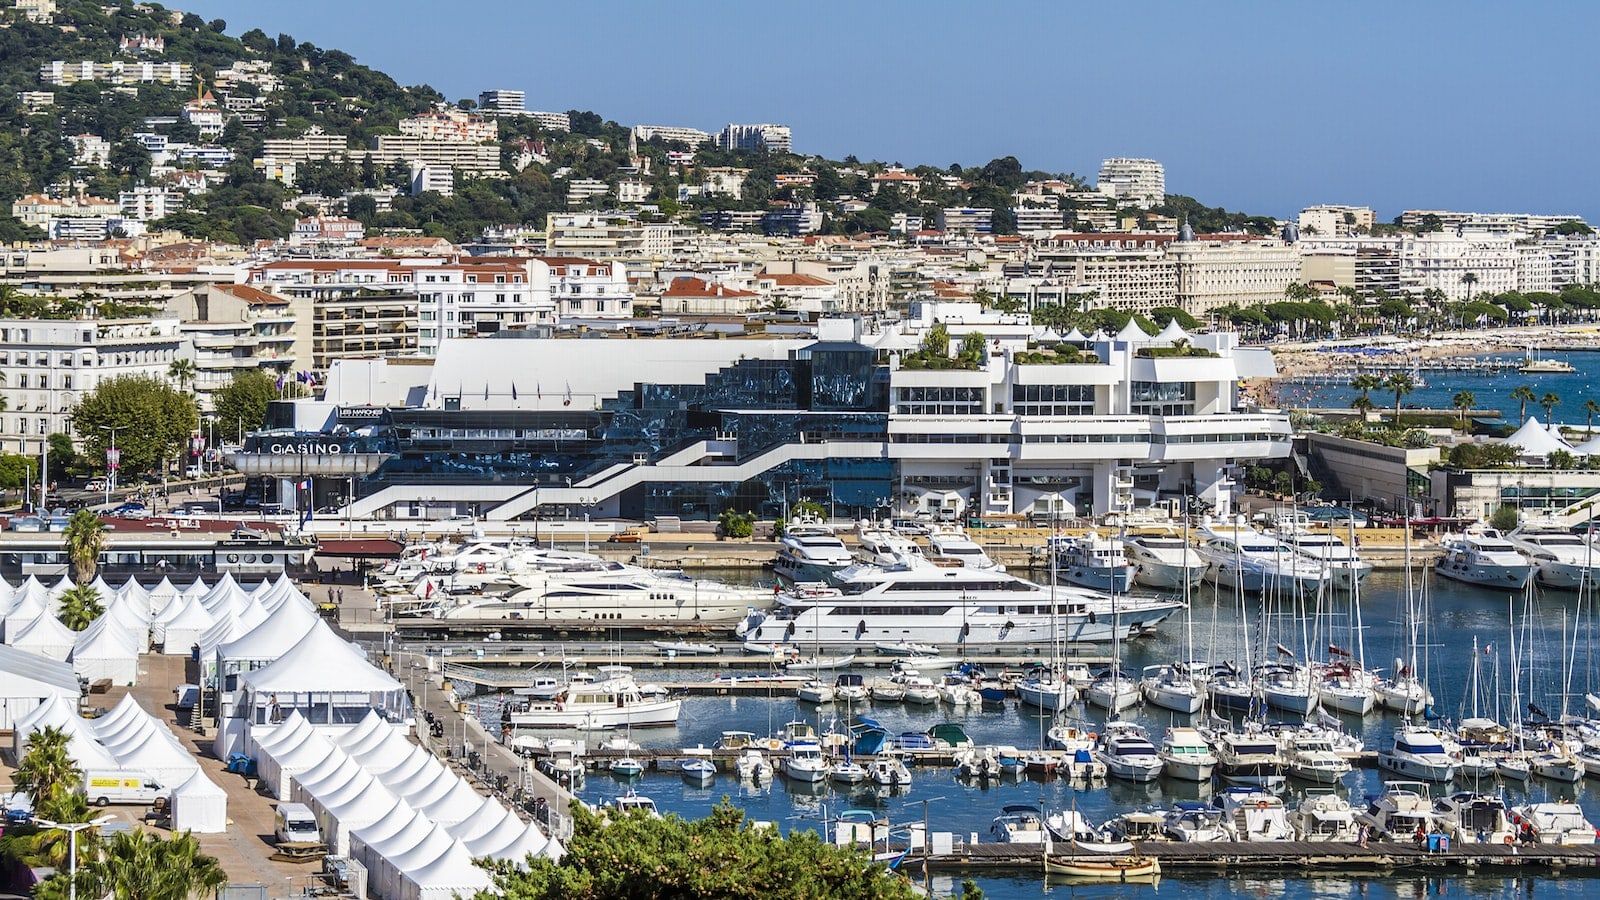 The Boat Show of Cannes